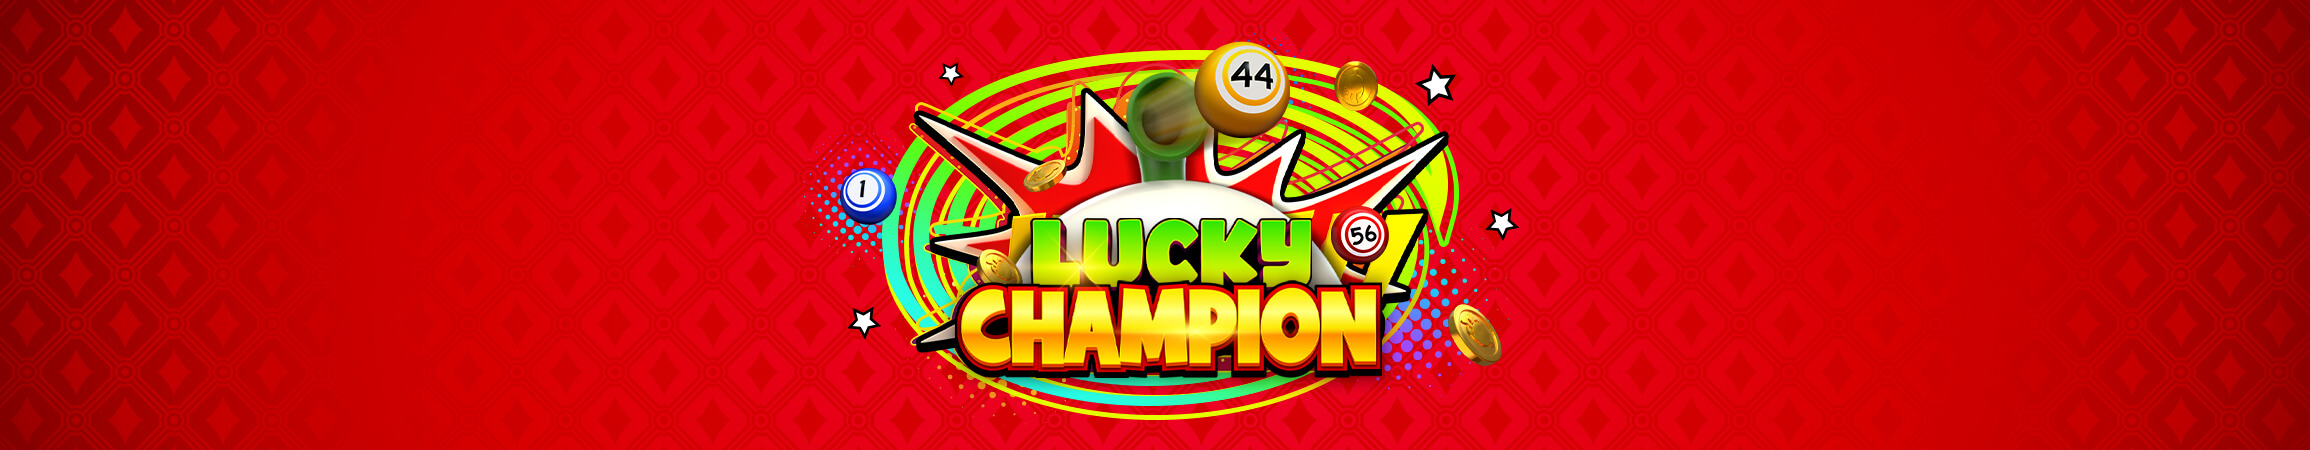 Scratch and become one of FBM®’s Lucky Champions